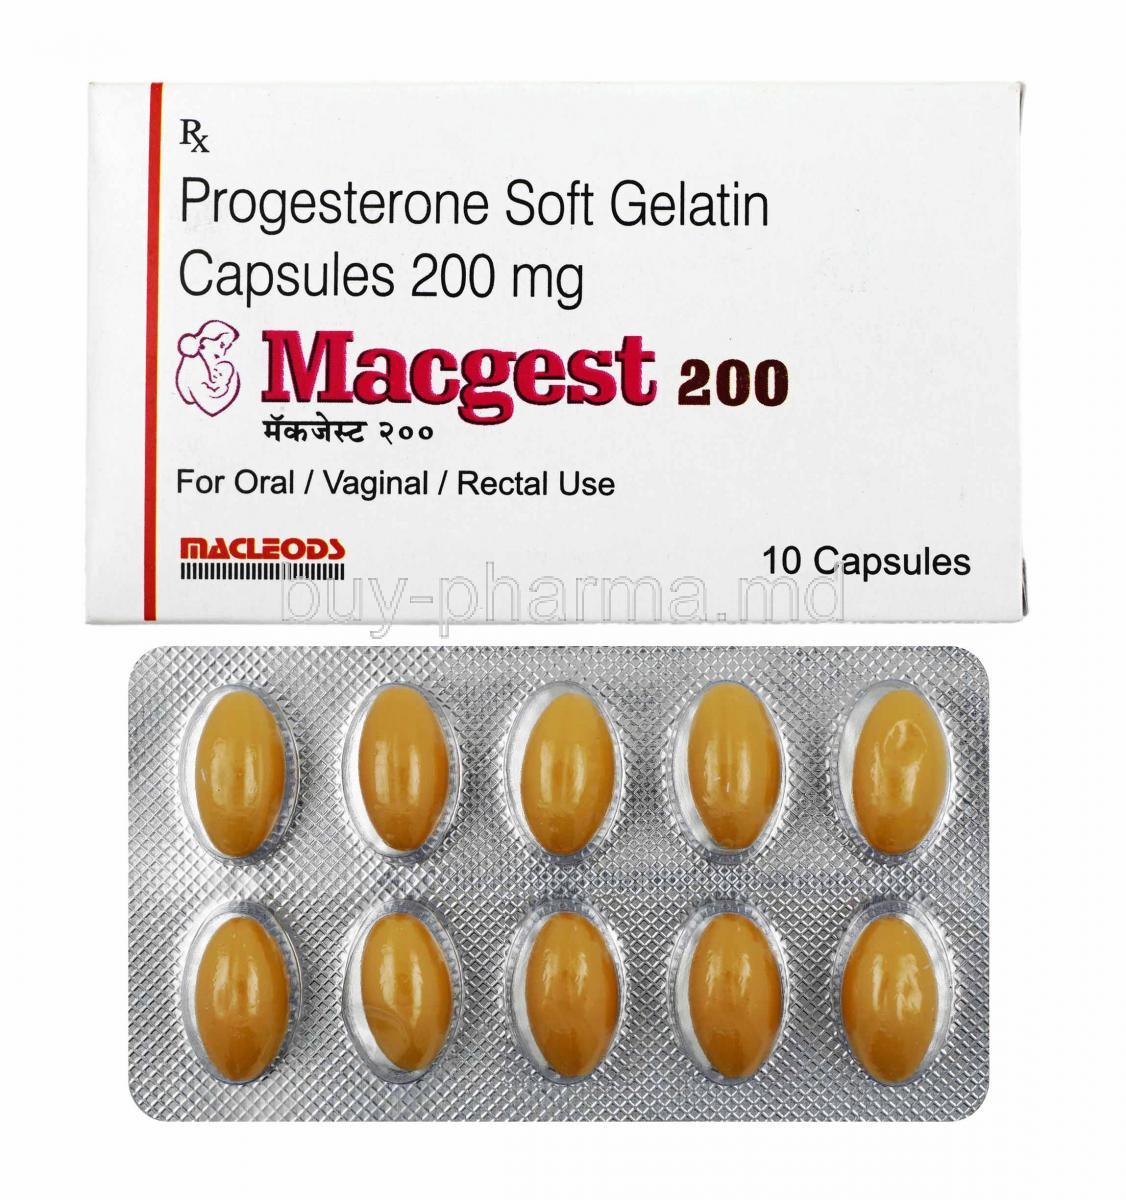 Macgest, Progesterone 200mg box and capsules